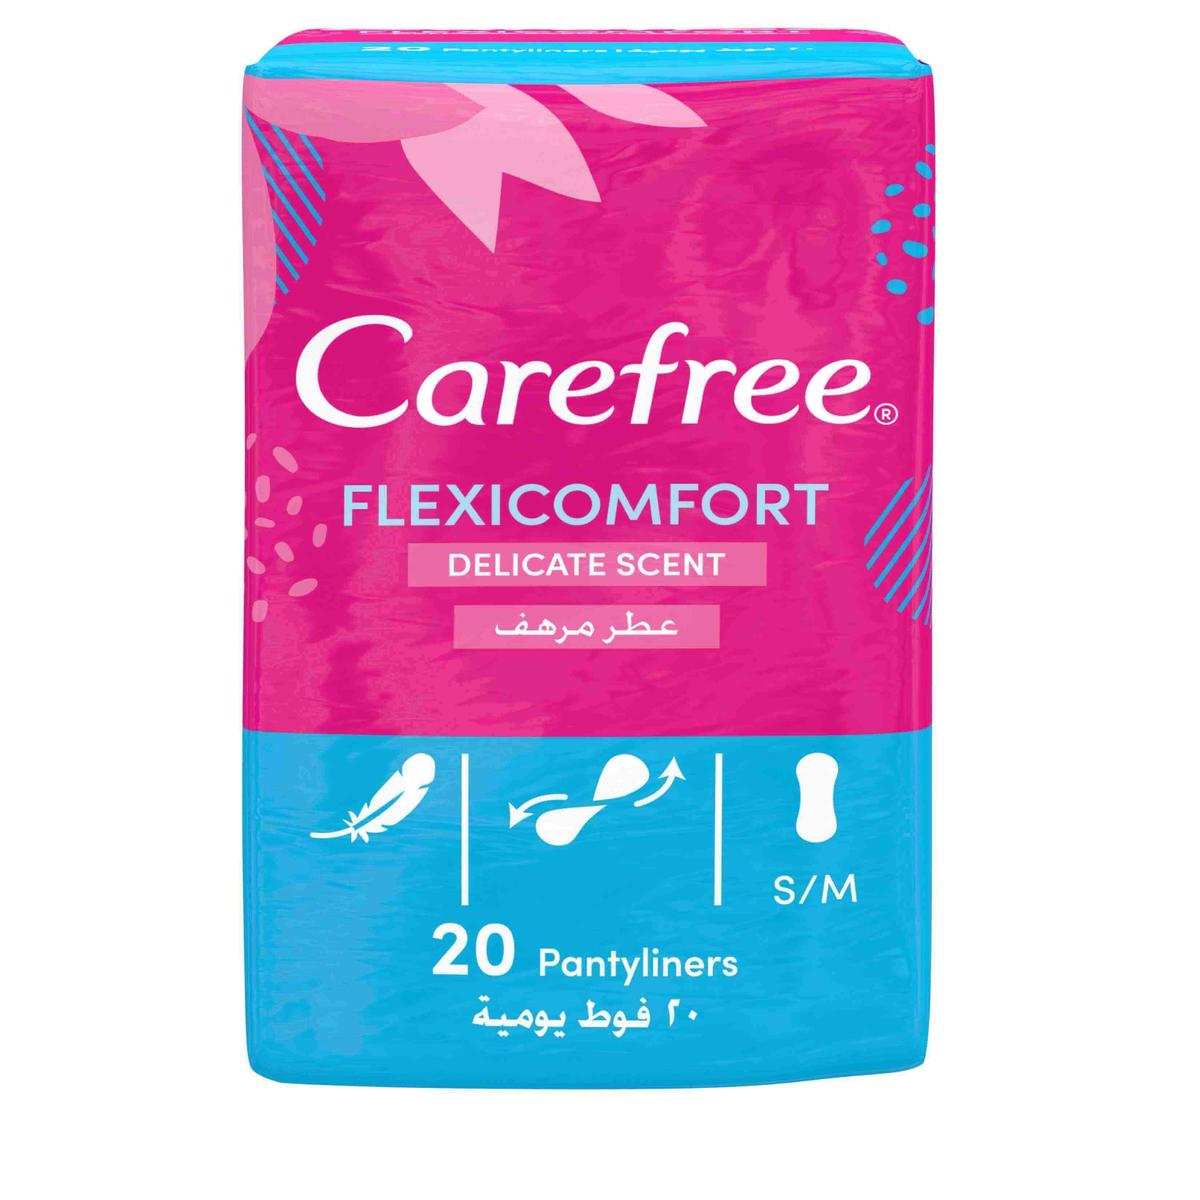 Carefree Flexicomfort Panty Liner Delicate Scent Unscented 20 Pack